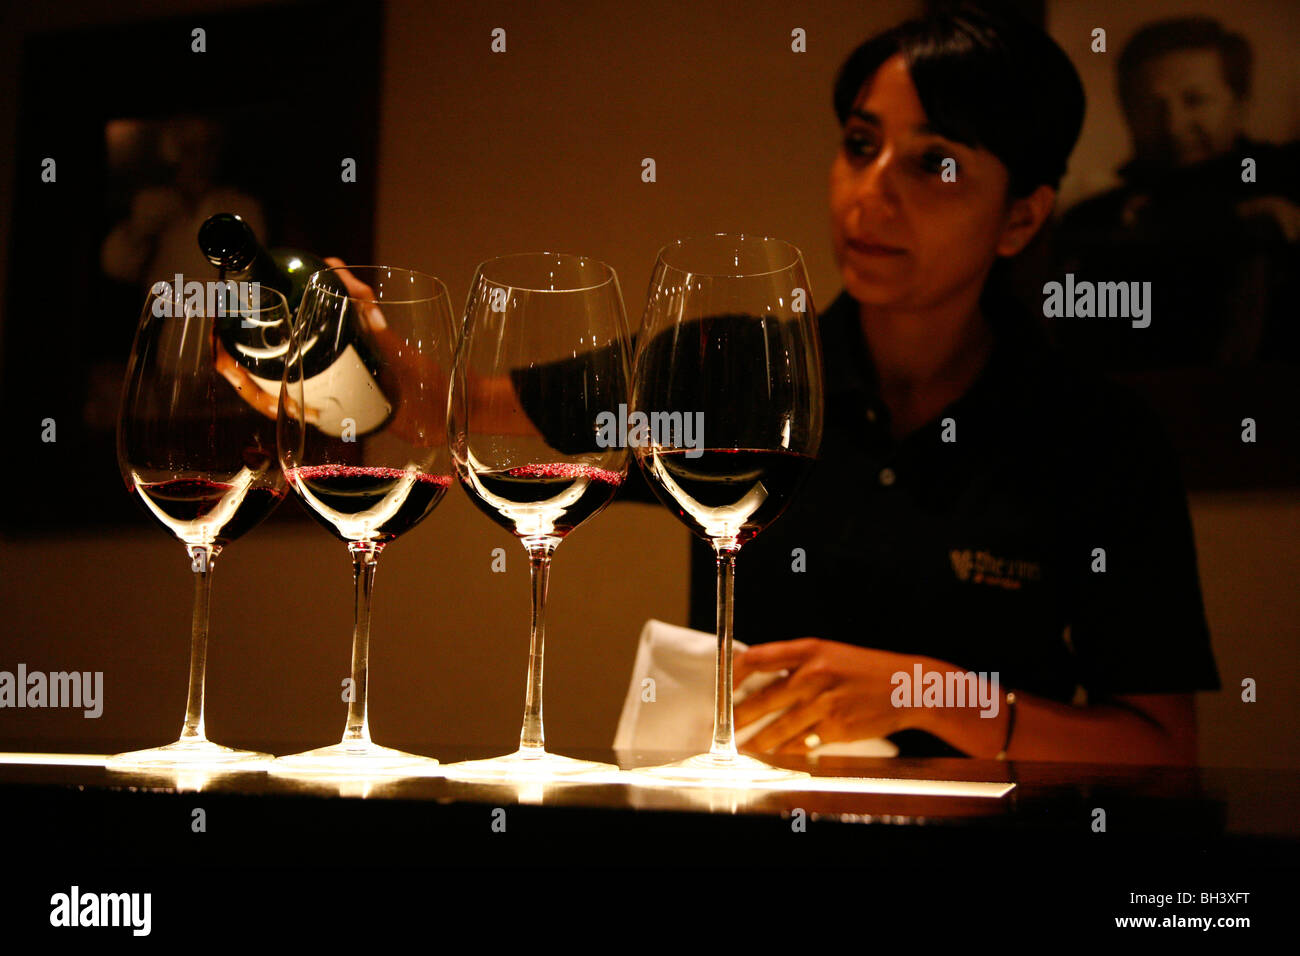 Woman pouring wine at the tasting room of Vines of Mendoza wine bar, Mendoza, Argentina. Stock Photo